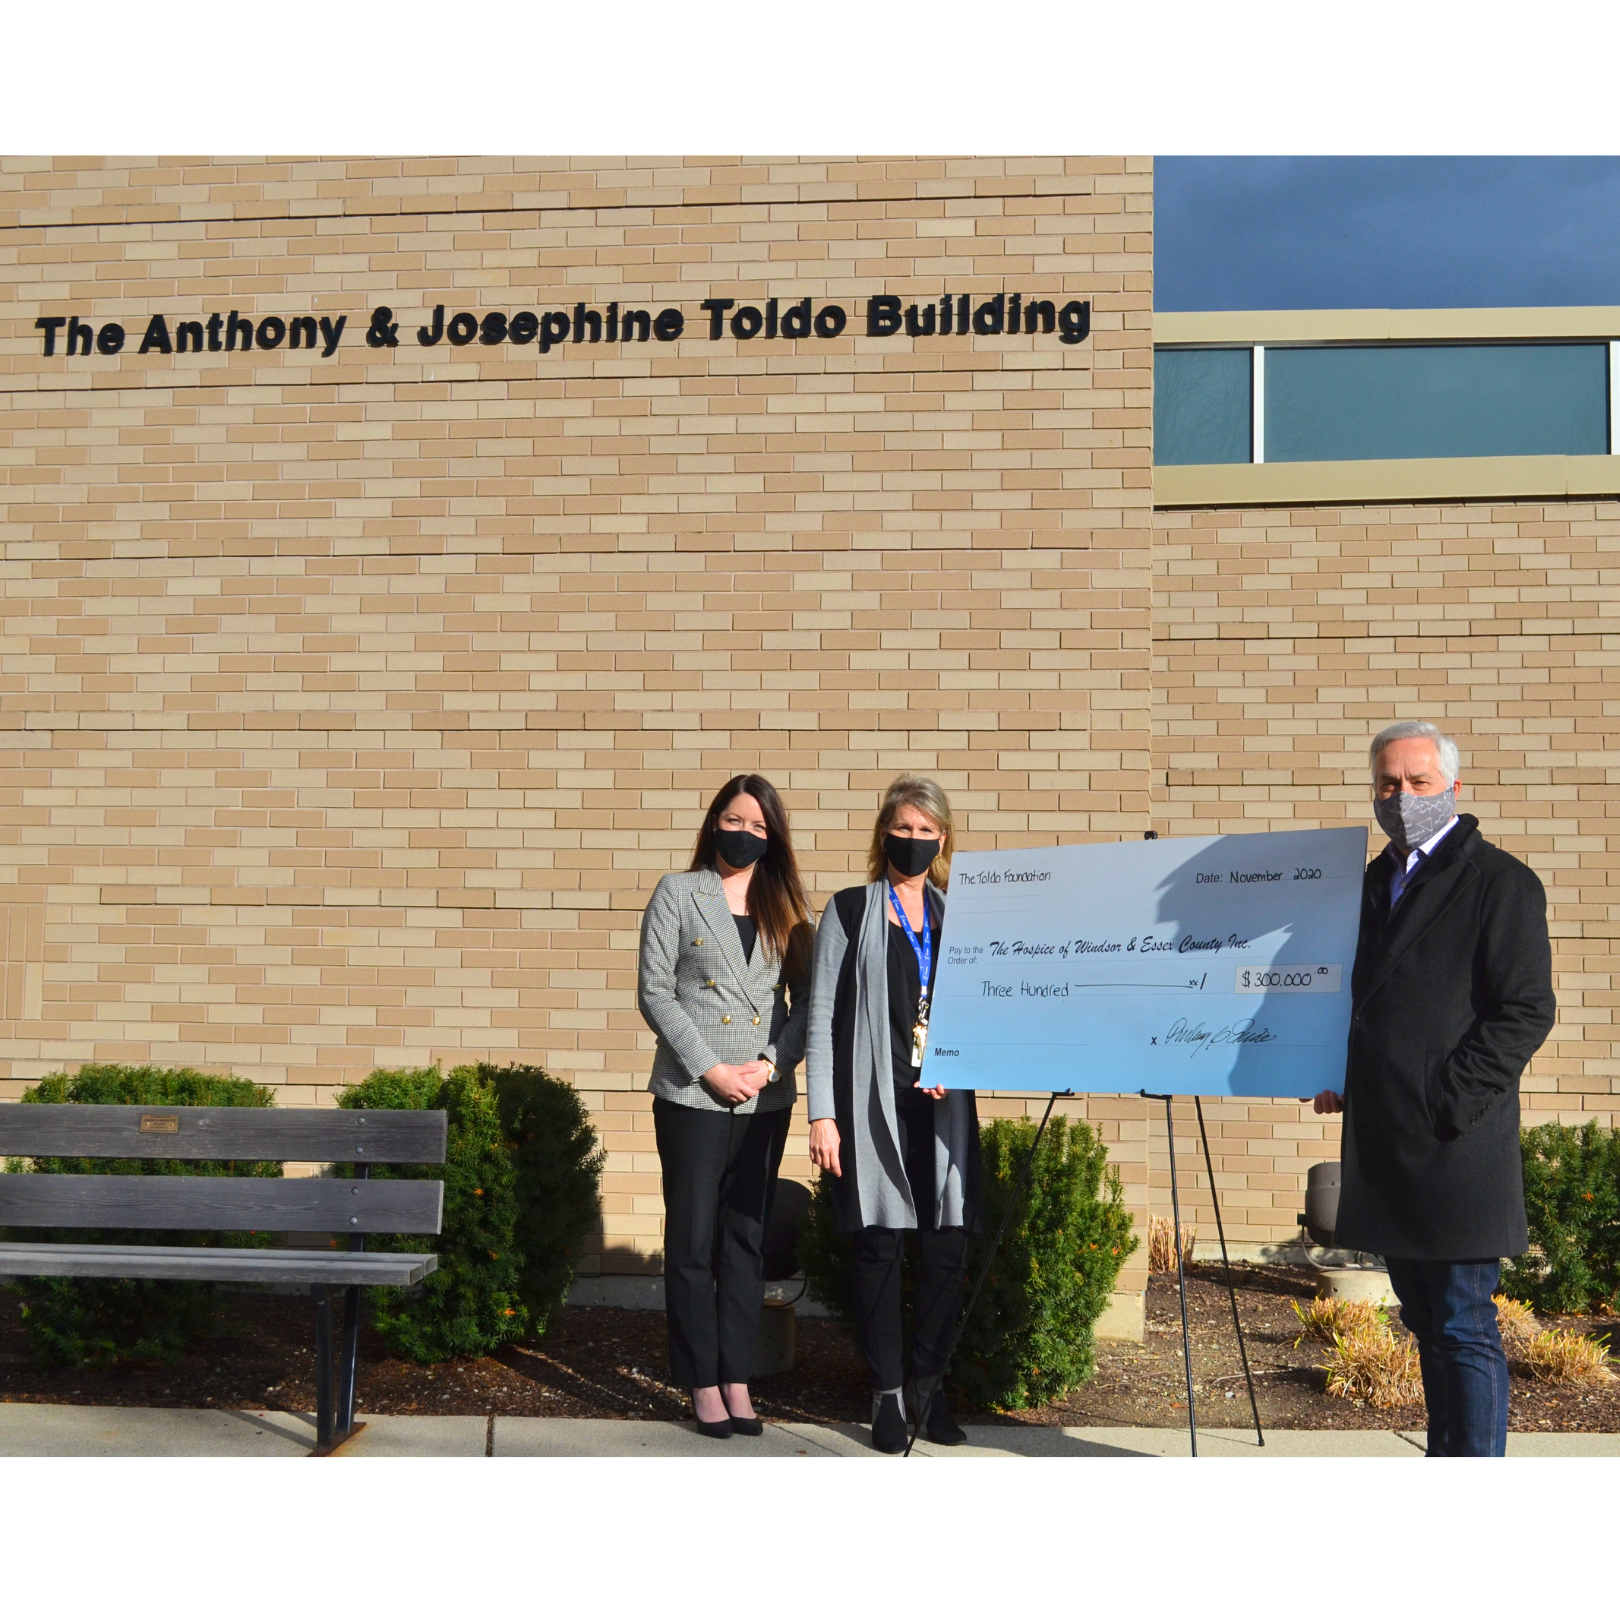 Donation in front of The Anthony & Josephine Toldo Building